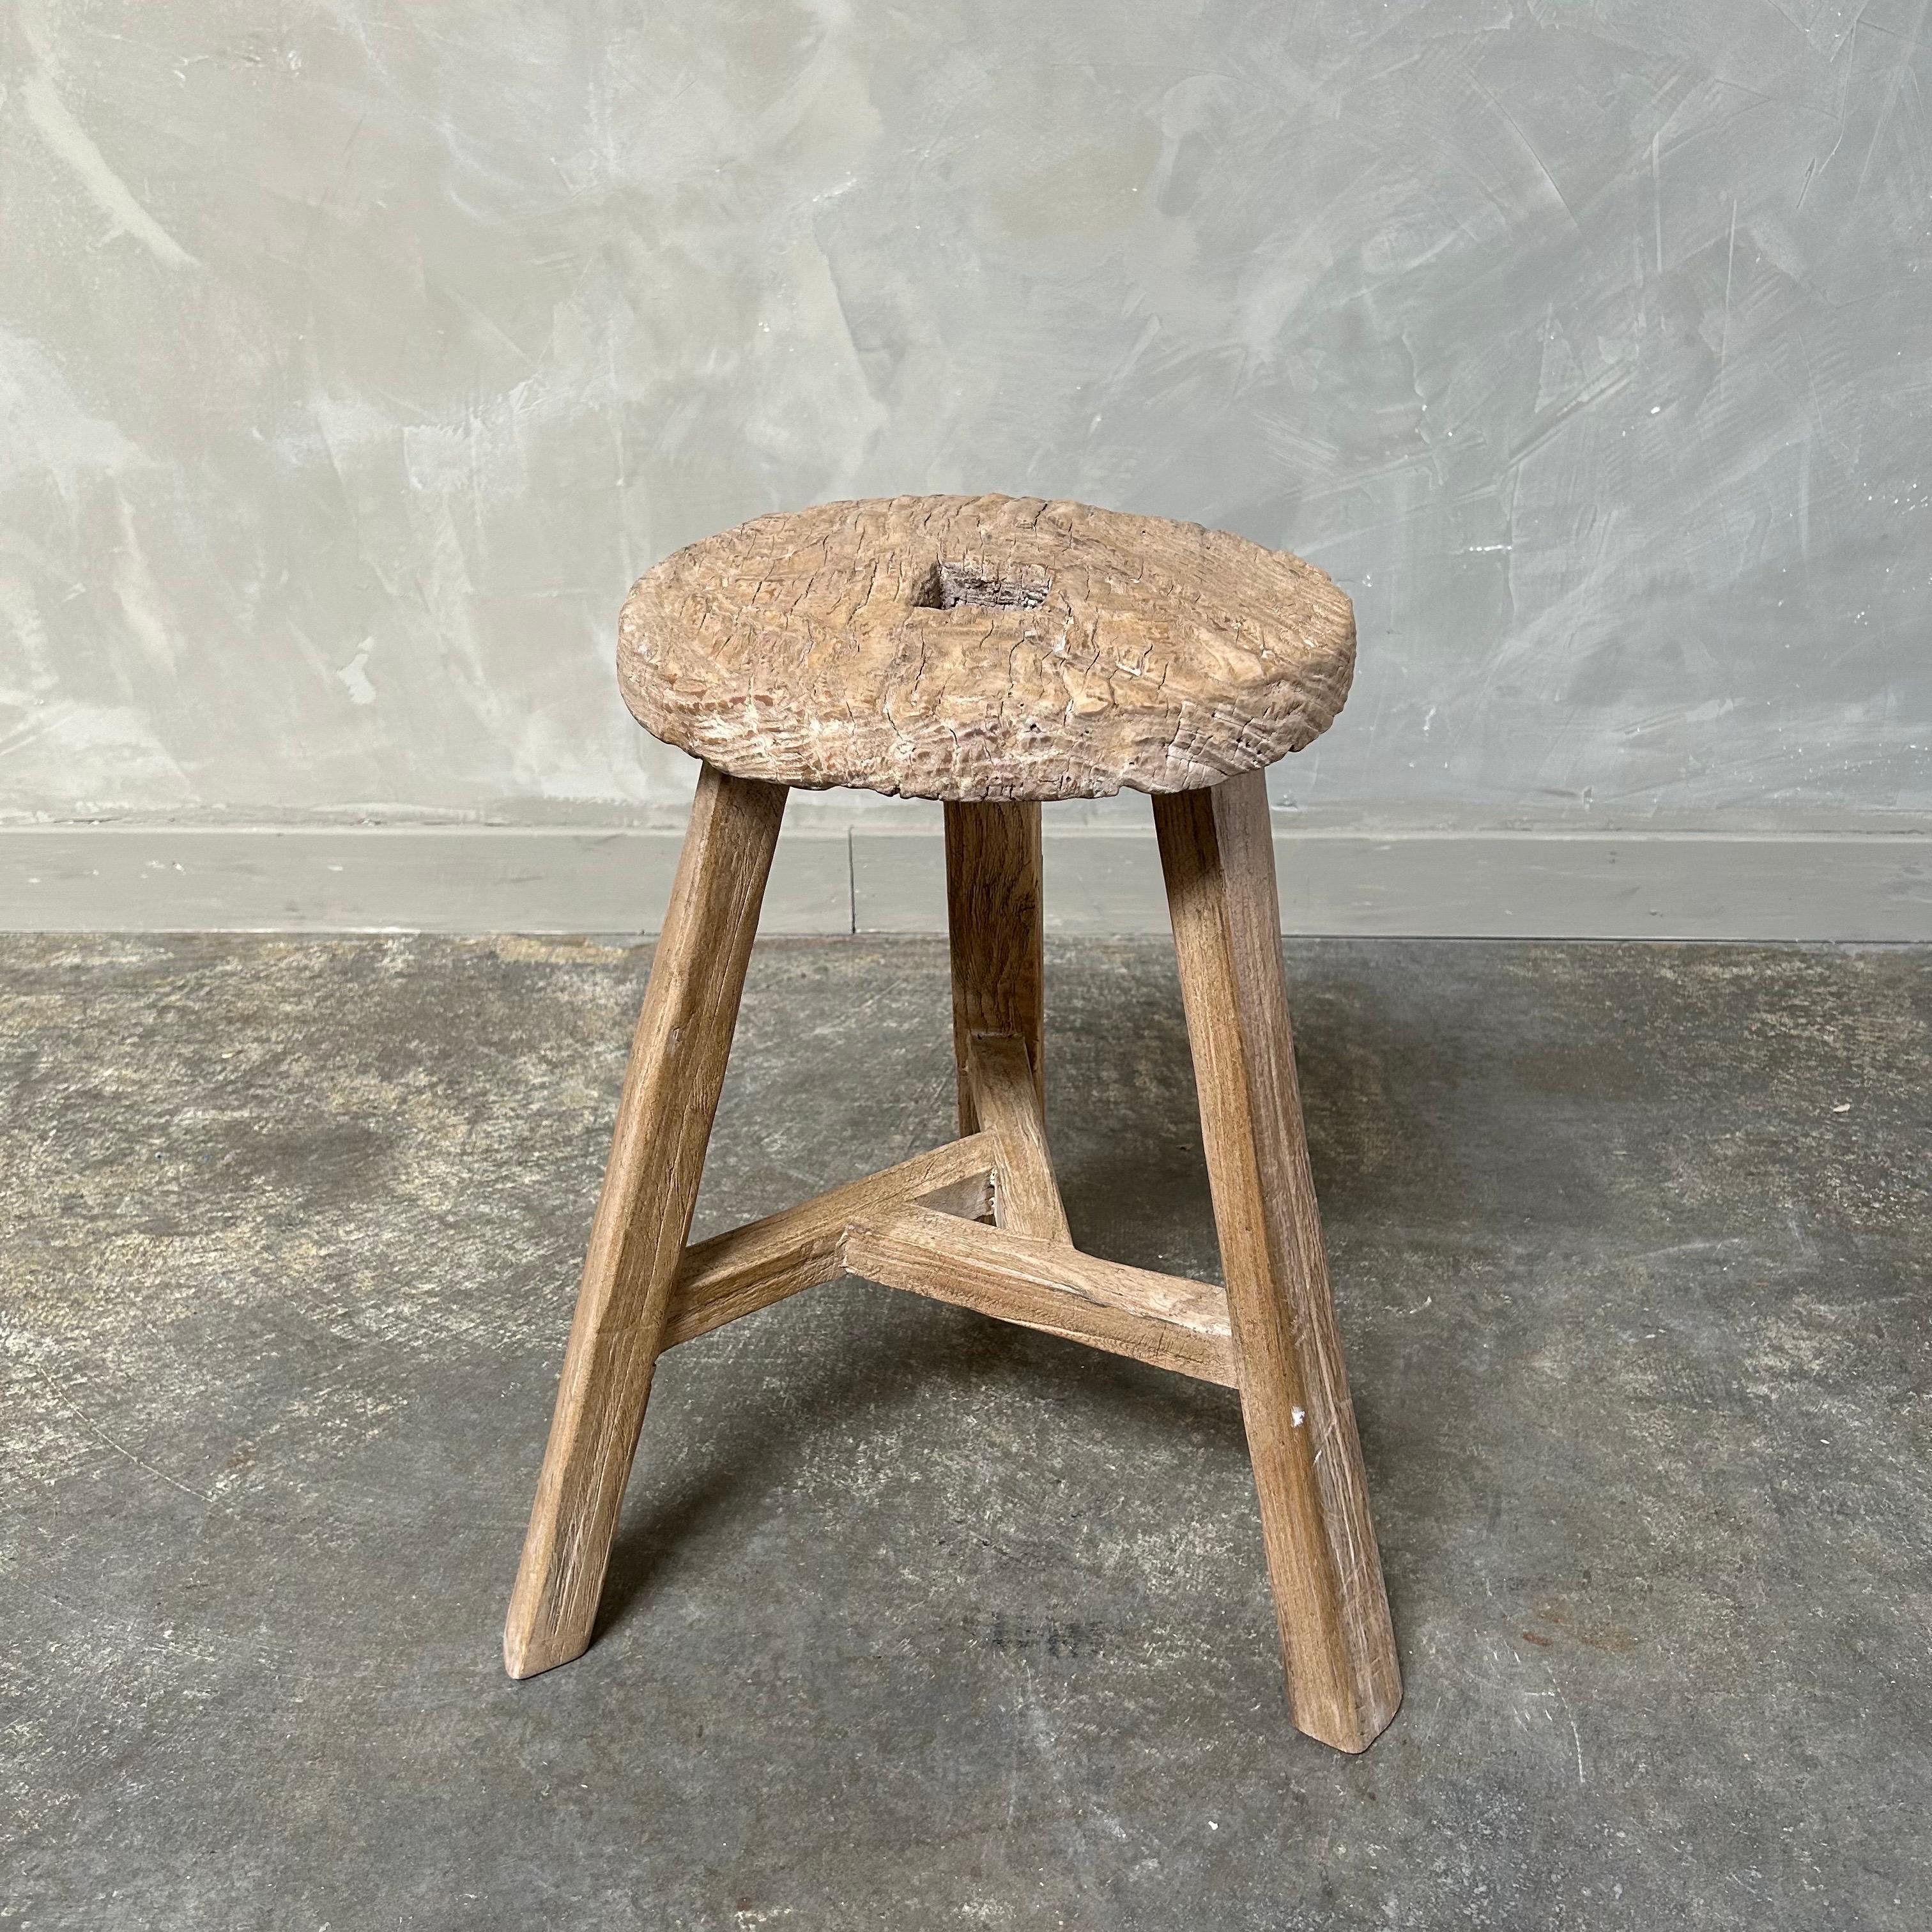 Elm wheel side table/ stool. Antique wheel side table/stool. This vintage elm wood wheel stool is finished with medium to dark stain. The stool is solid and sturdy ready for everyday use. Use as a side table, stool, powder room to add vintage style